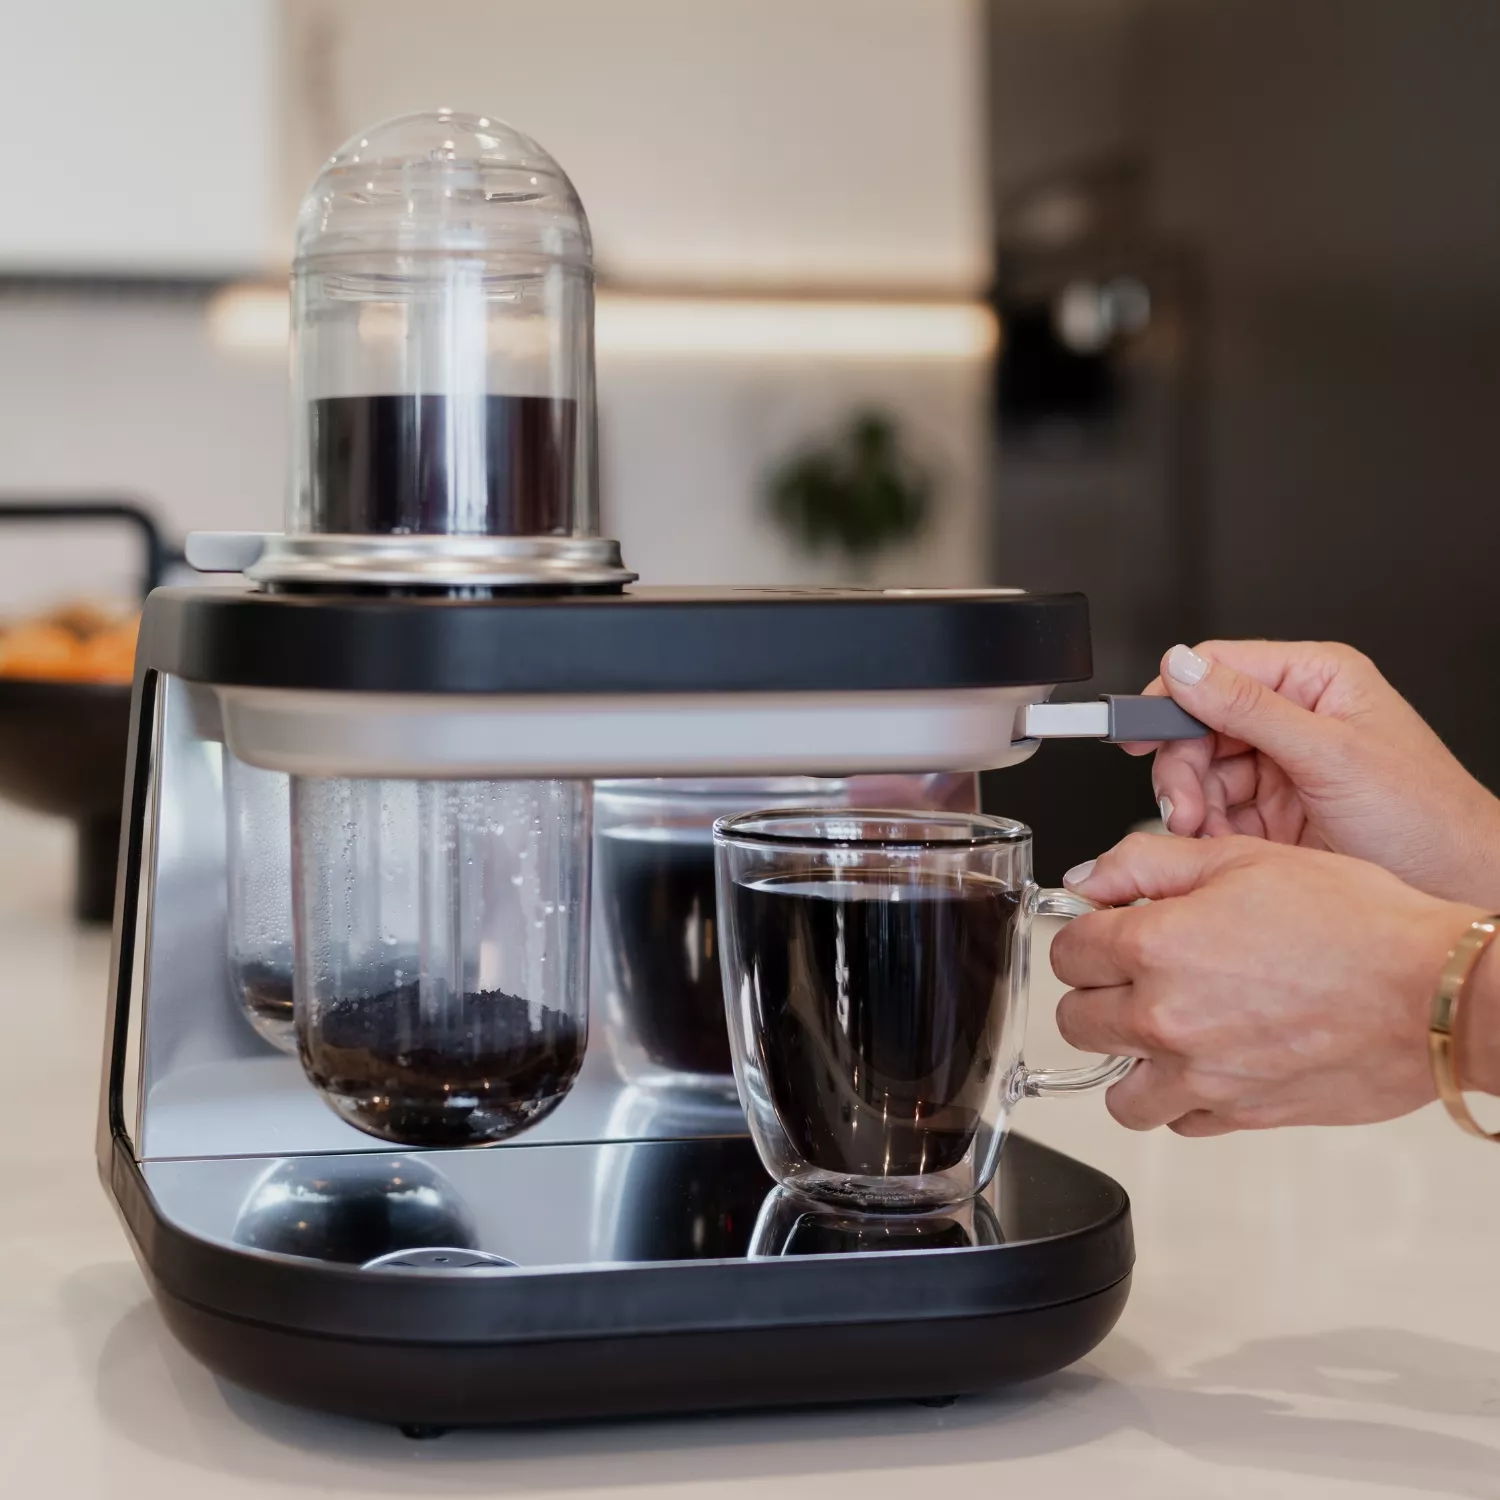 Siphonysta Siphon Coffee Brewing System Review